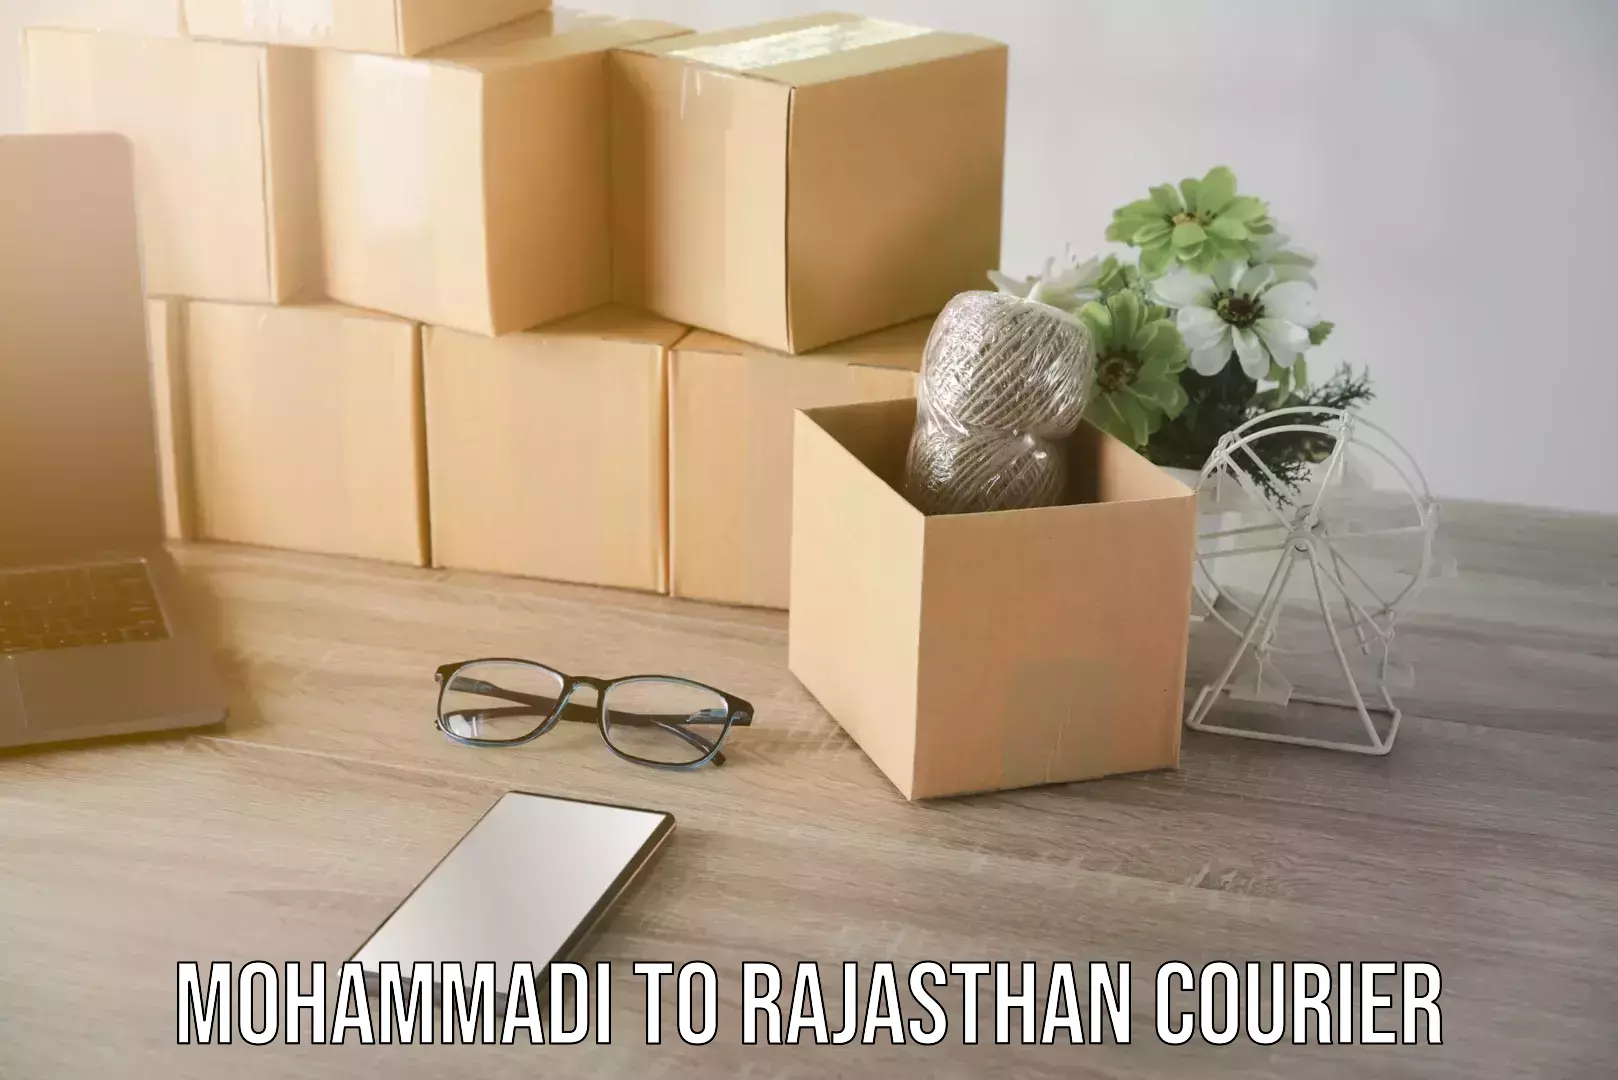 Trusted relocation experts Mohammadi to Rajasthan